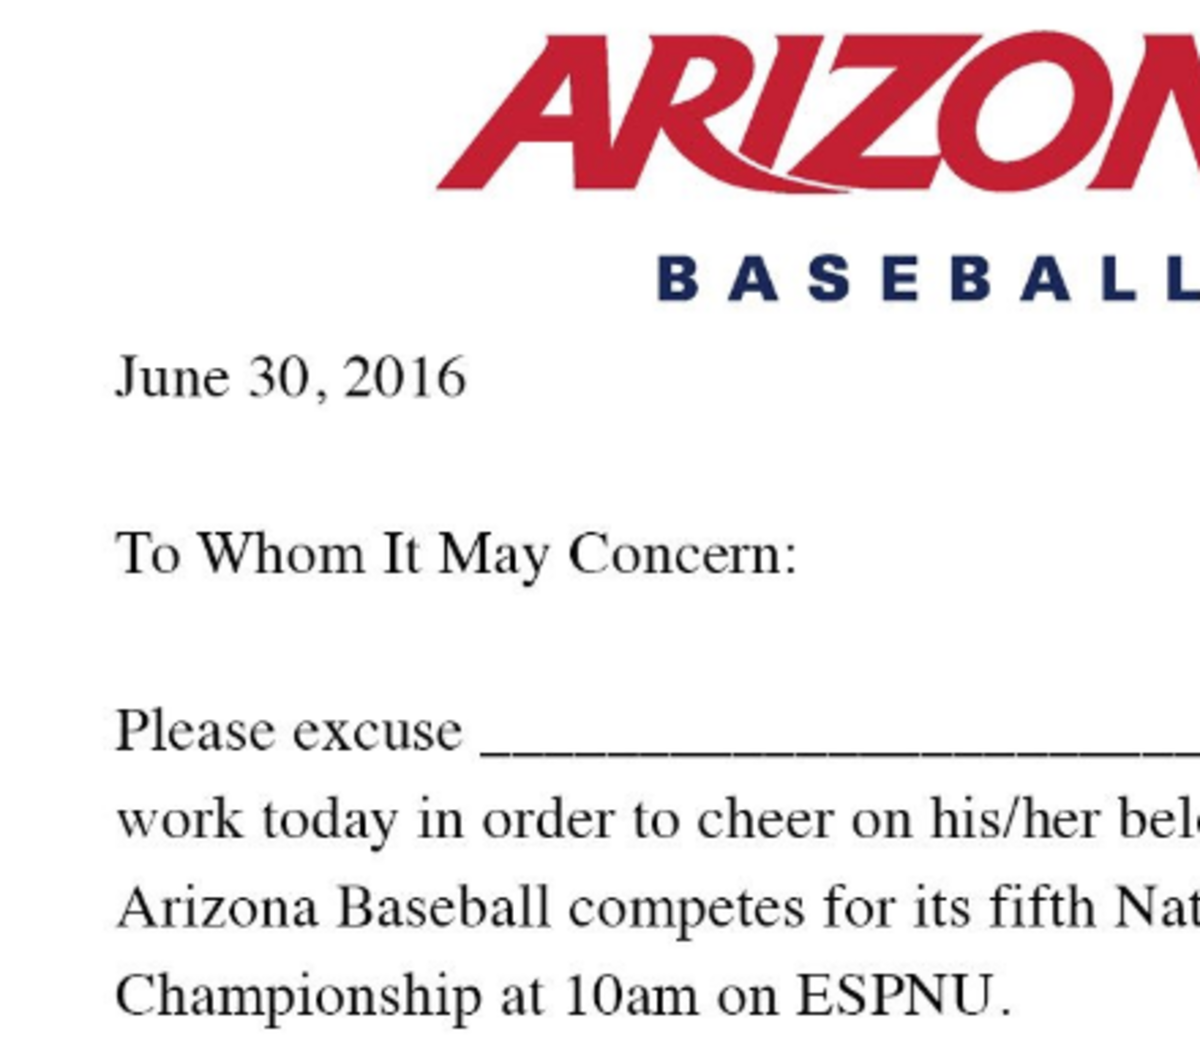 Arizona's athletic director releases a note about CWS title game.